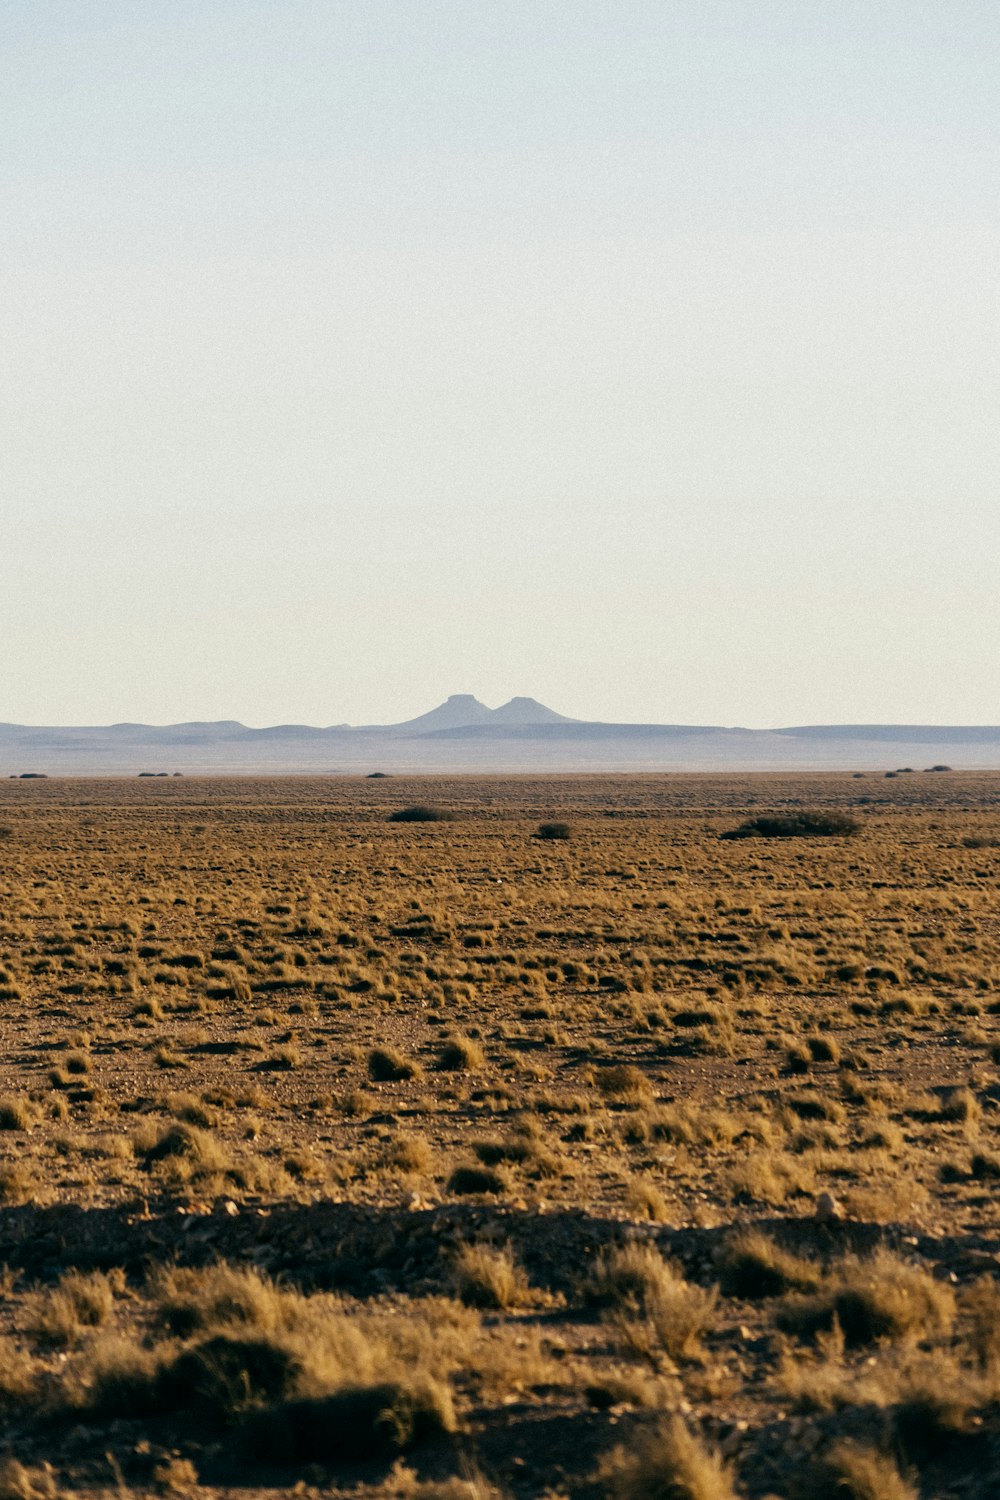 a lone giraffe standing in the middle of a desert